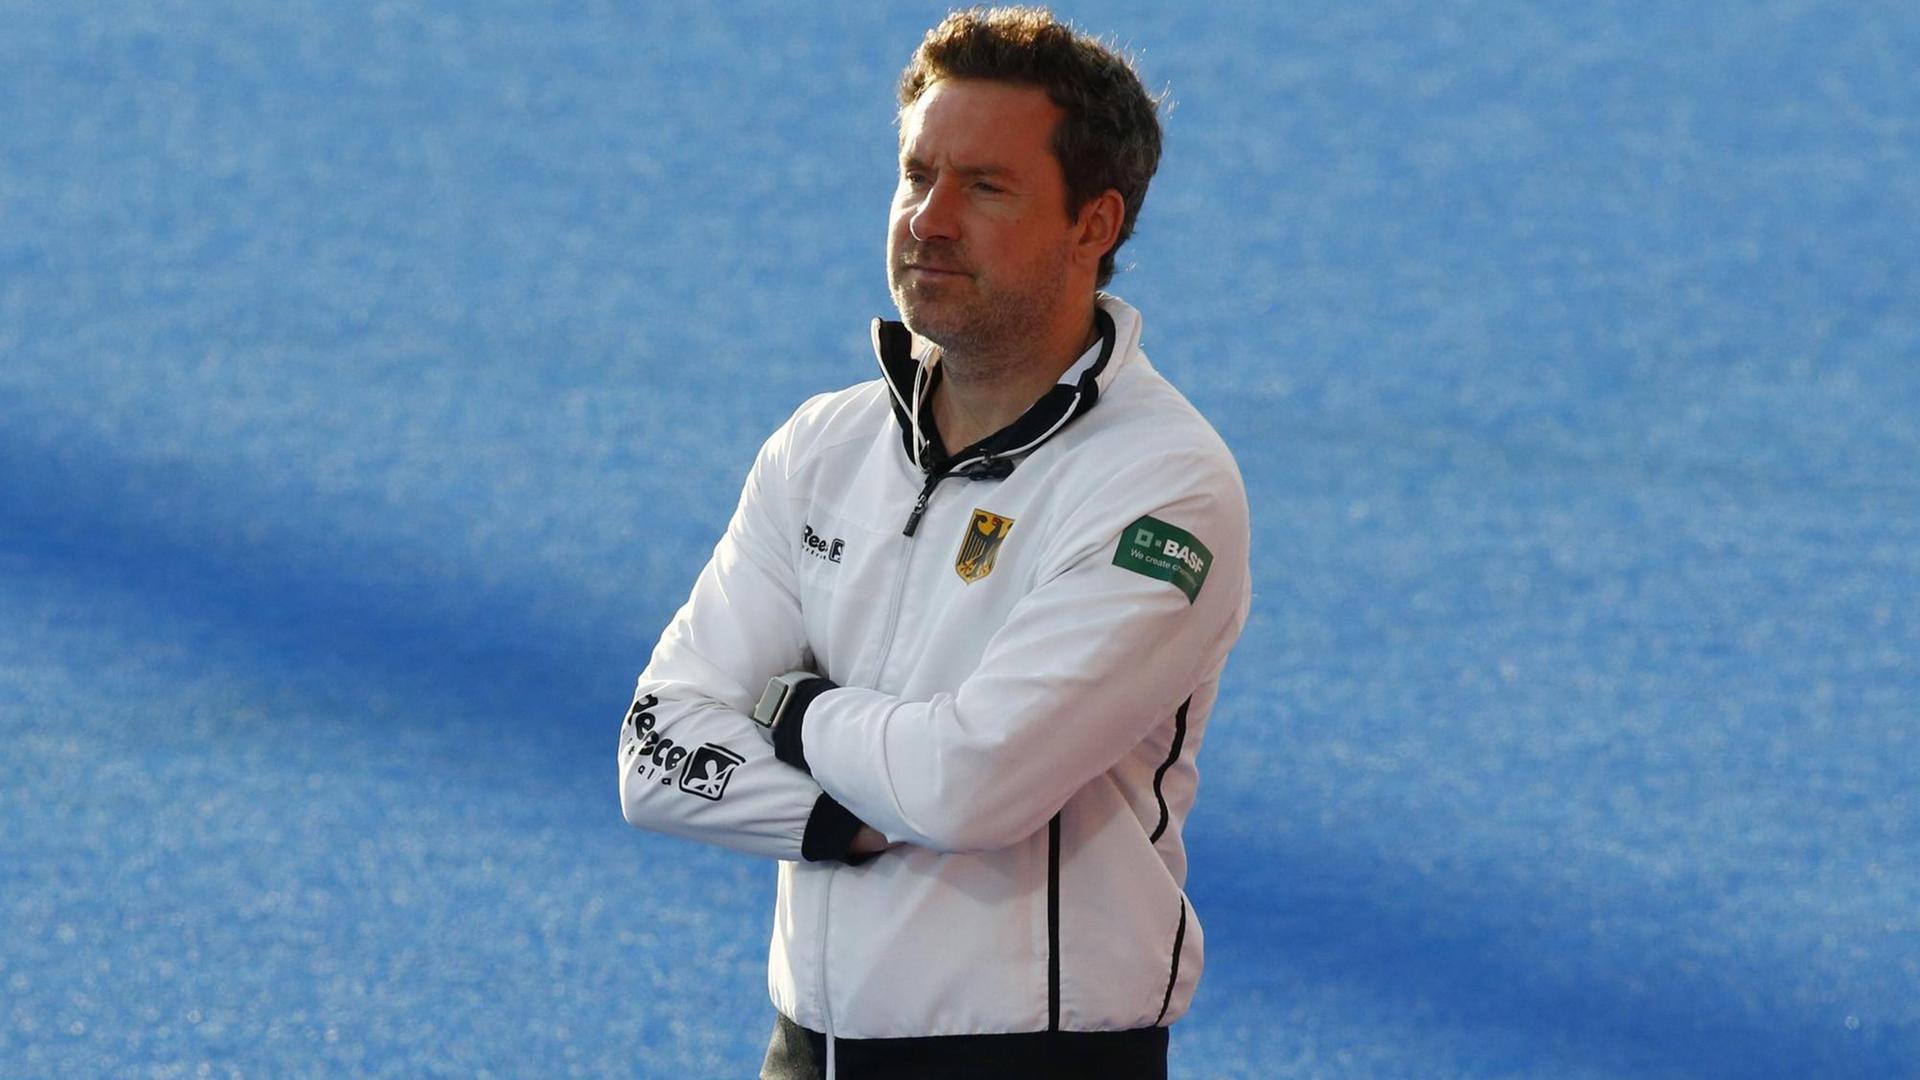 June 6, 2019 - London, England, United Kingdom - Stefan Kermas Coach of Germany.during FIH Pro League between Great Britain and Germany at Lee Valley Hockey and Tennis Centre on 06 June 2019 in London, England. Great Britain v Germany - FIH Field hockey, Feldhockey Pro League PUBLICATIONxINxGERxSUIxAUTxONLY - ZUMAn230 20190606_zaa_n230_1026 Copyright: xActionxFotoxSportx